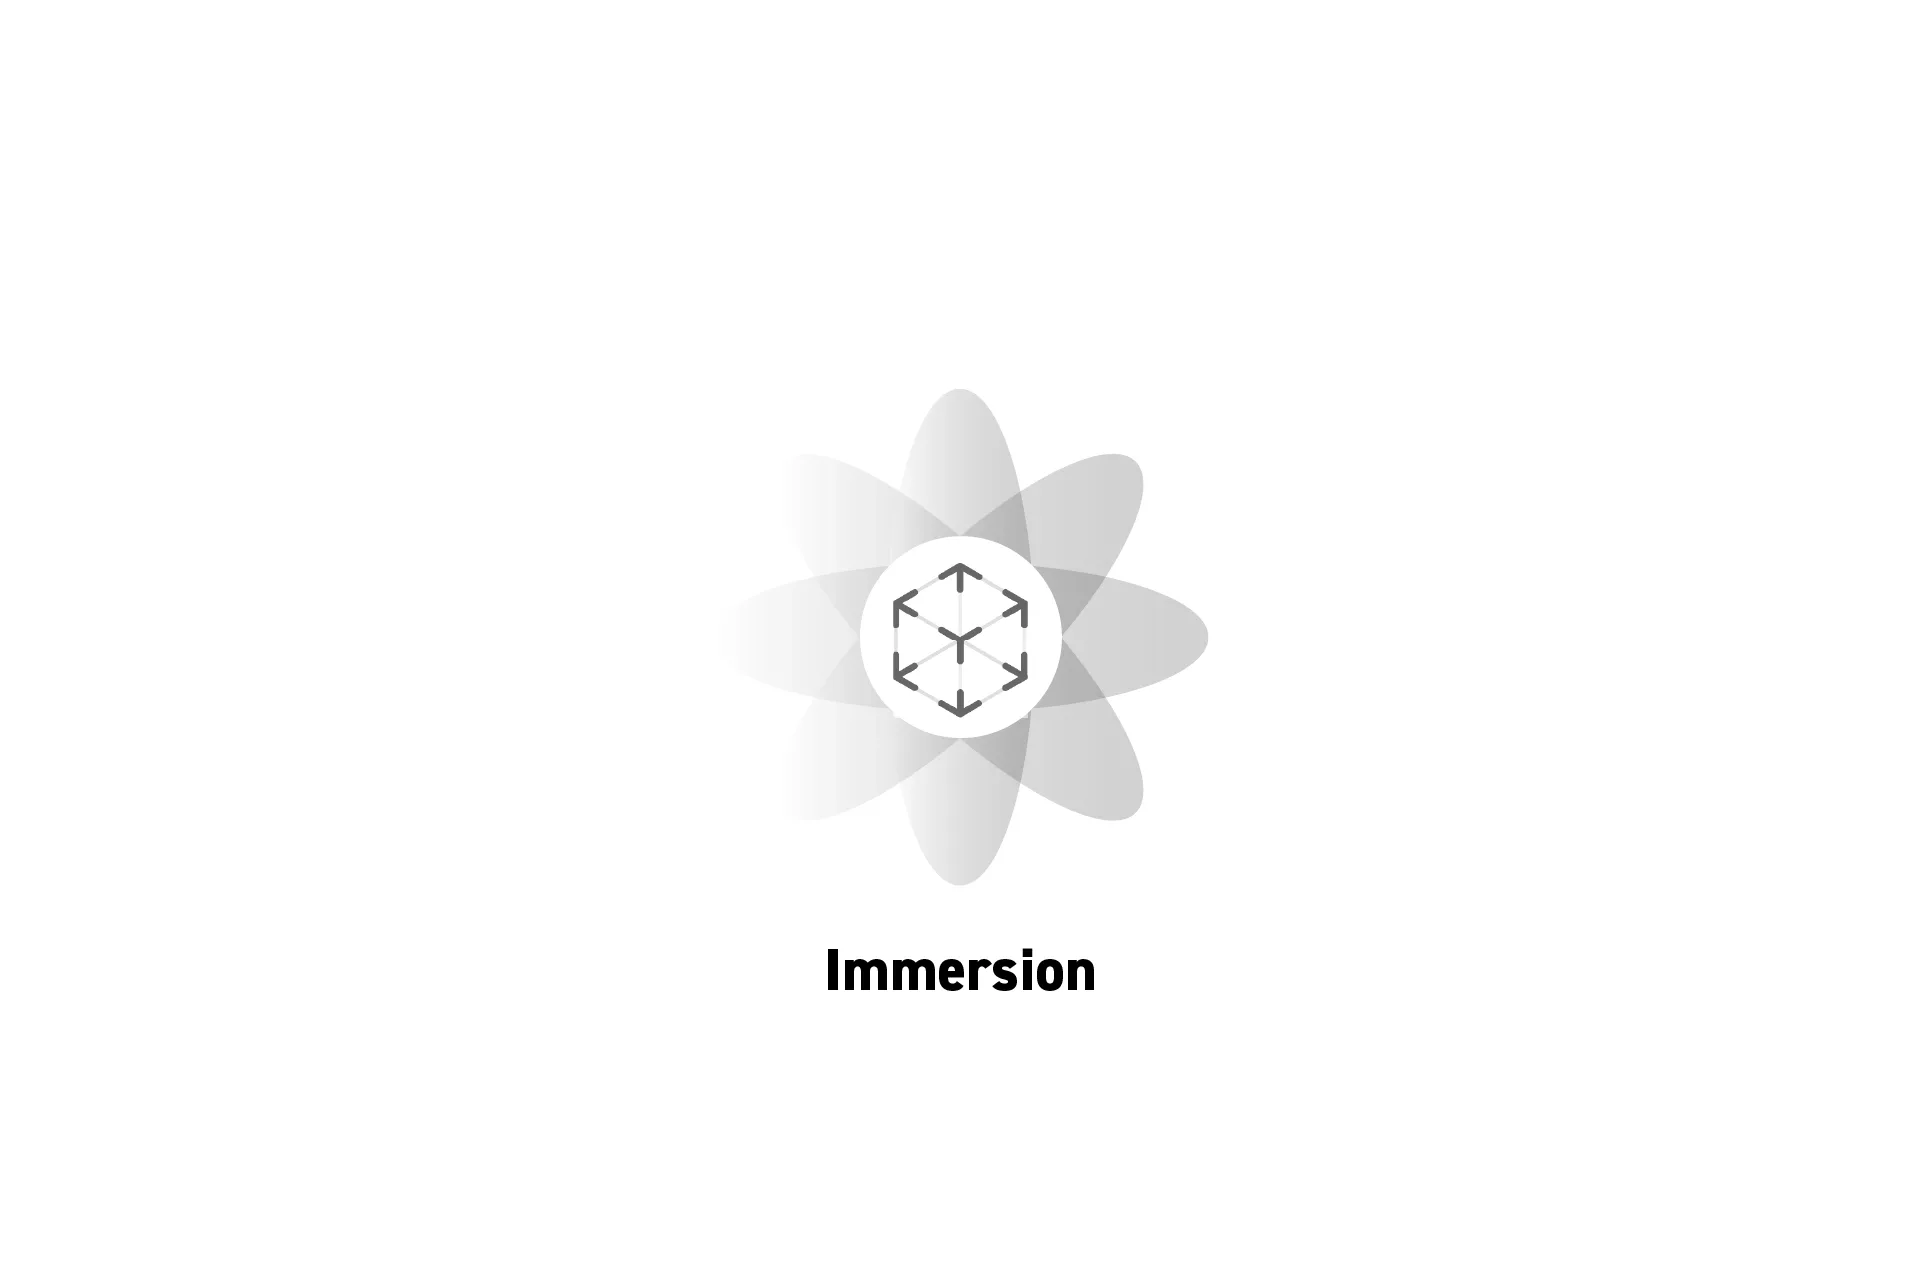 A flower that represents spatial computing with the text "Immersion" beneath it.